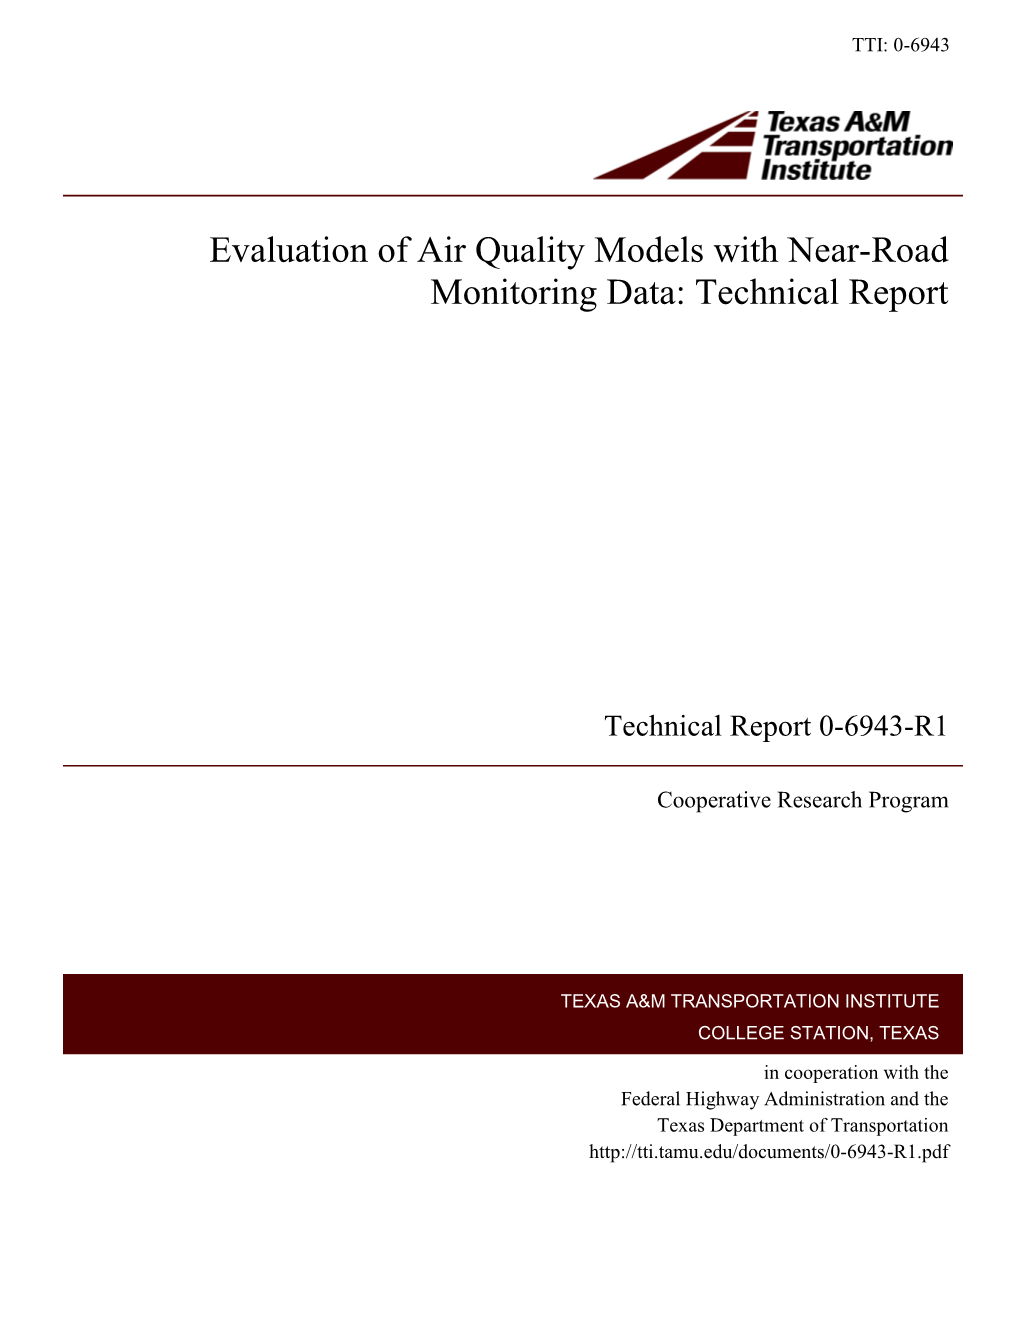 Evaluation of Air Quality Models with Near-Road Monitoring Data: Technical Report